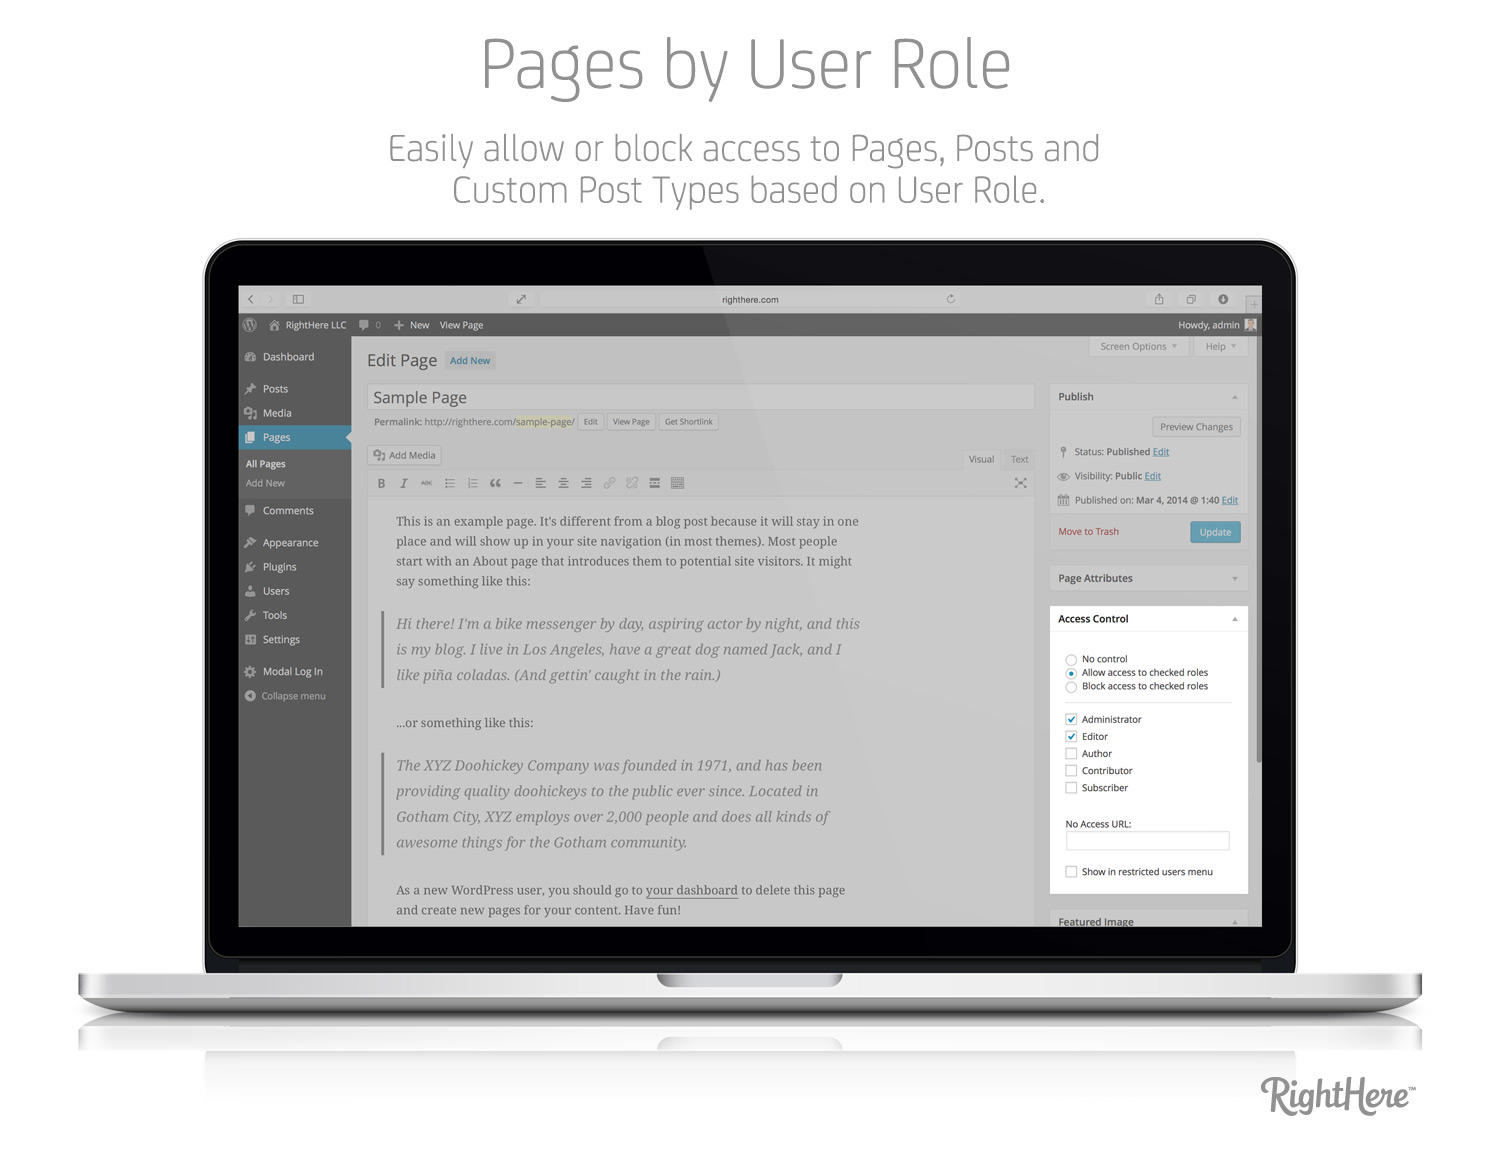 Pages by User Role for WordPress - Access Control Metabox